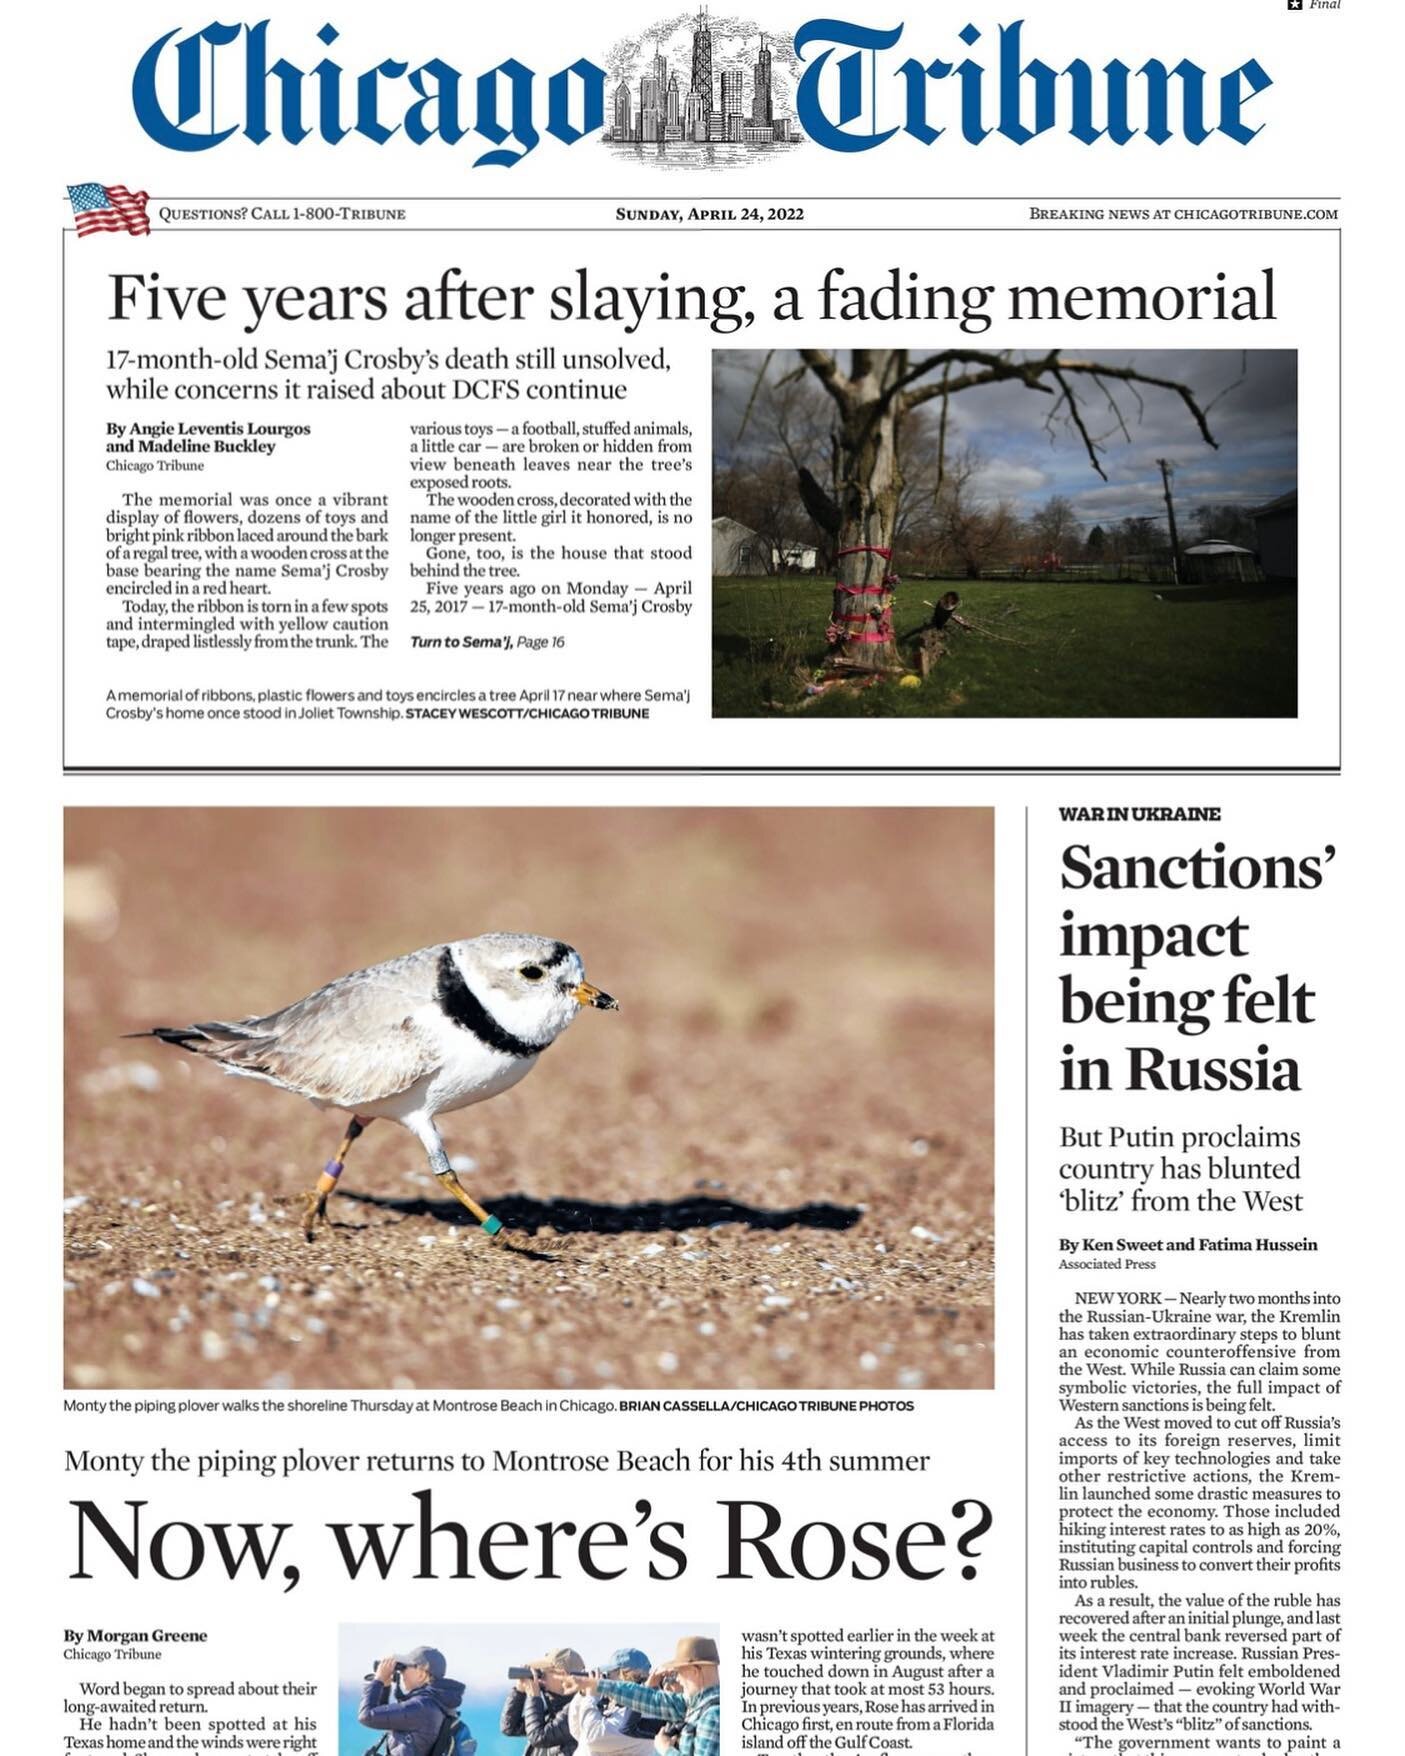 Wow! Front page news!
If you visit Montrose today, please remind your fellow beachgoers that the plovers need at least 100 feet of space. Migration is tough. They need to feed and rest as well as monitor for aerial predators #plover #chicago #bird #b